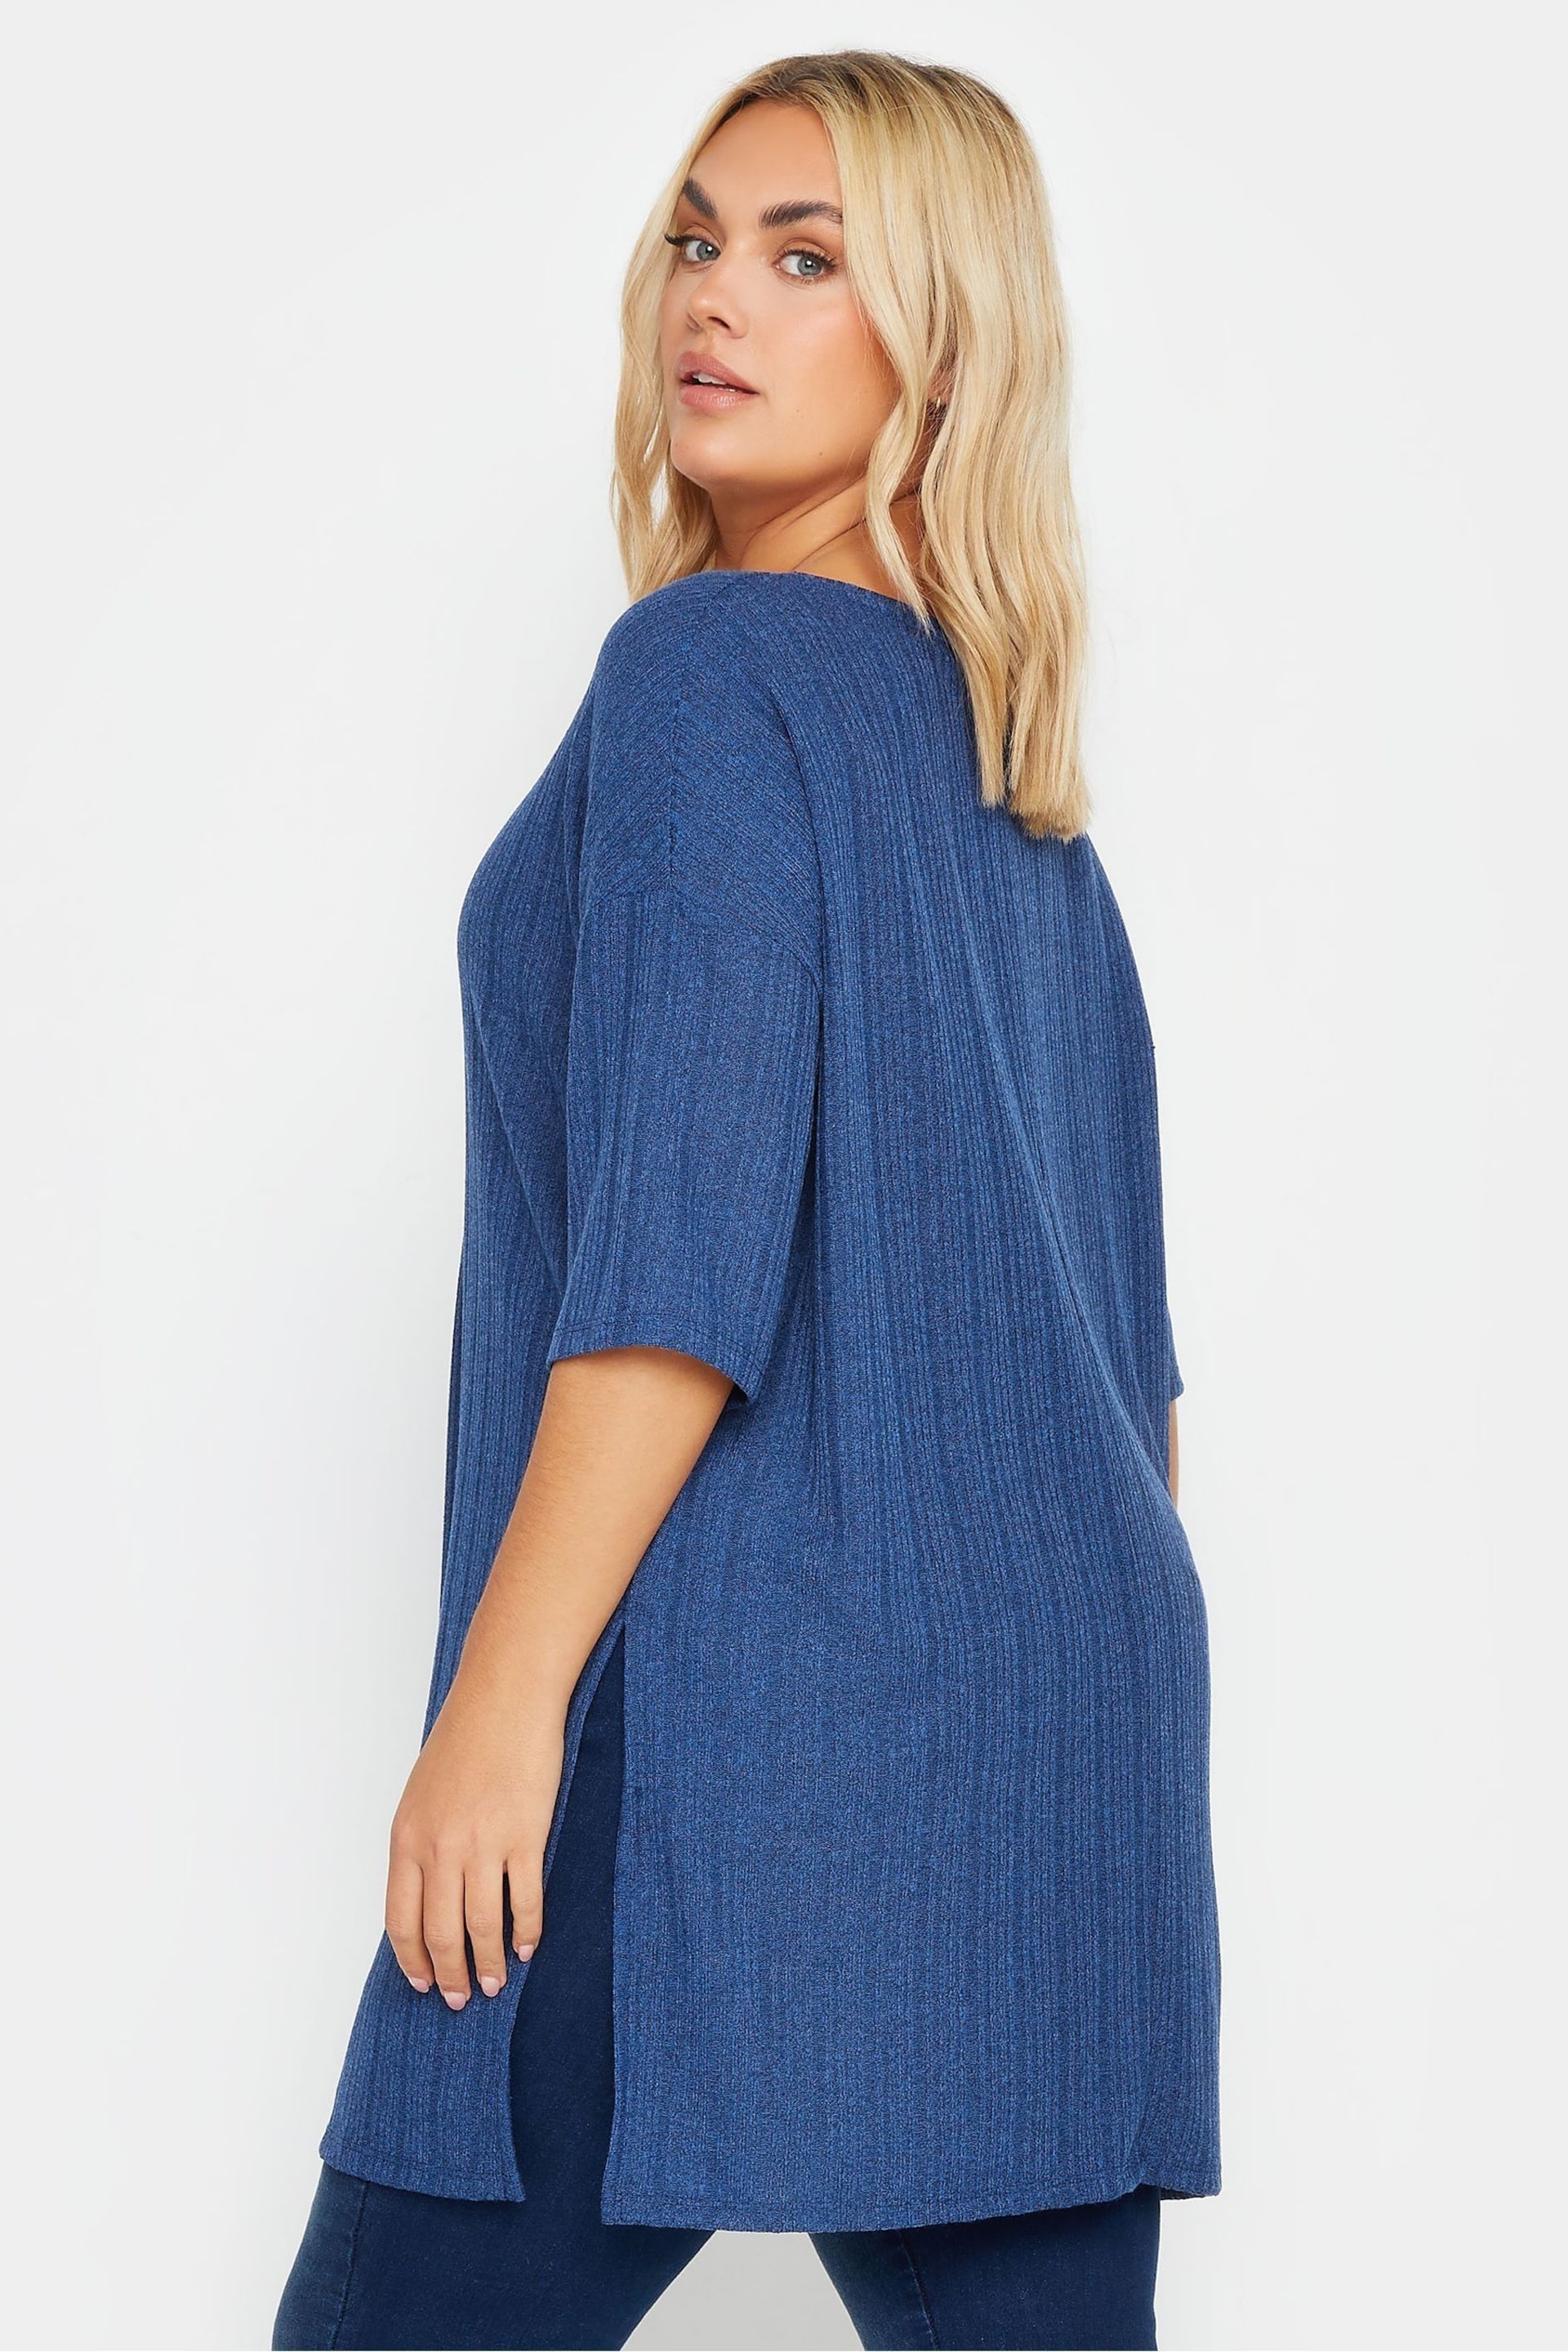 Yours Curve Blue Textured Oversized Top - Image 2 of 4